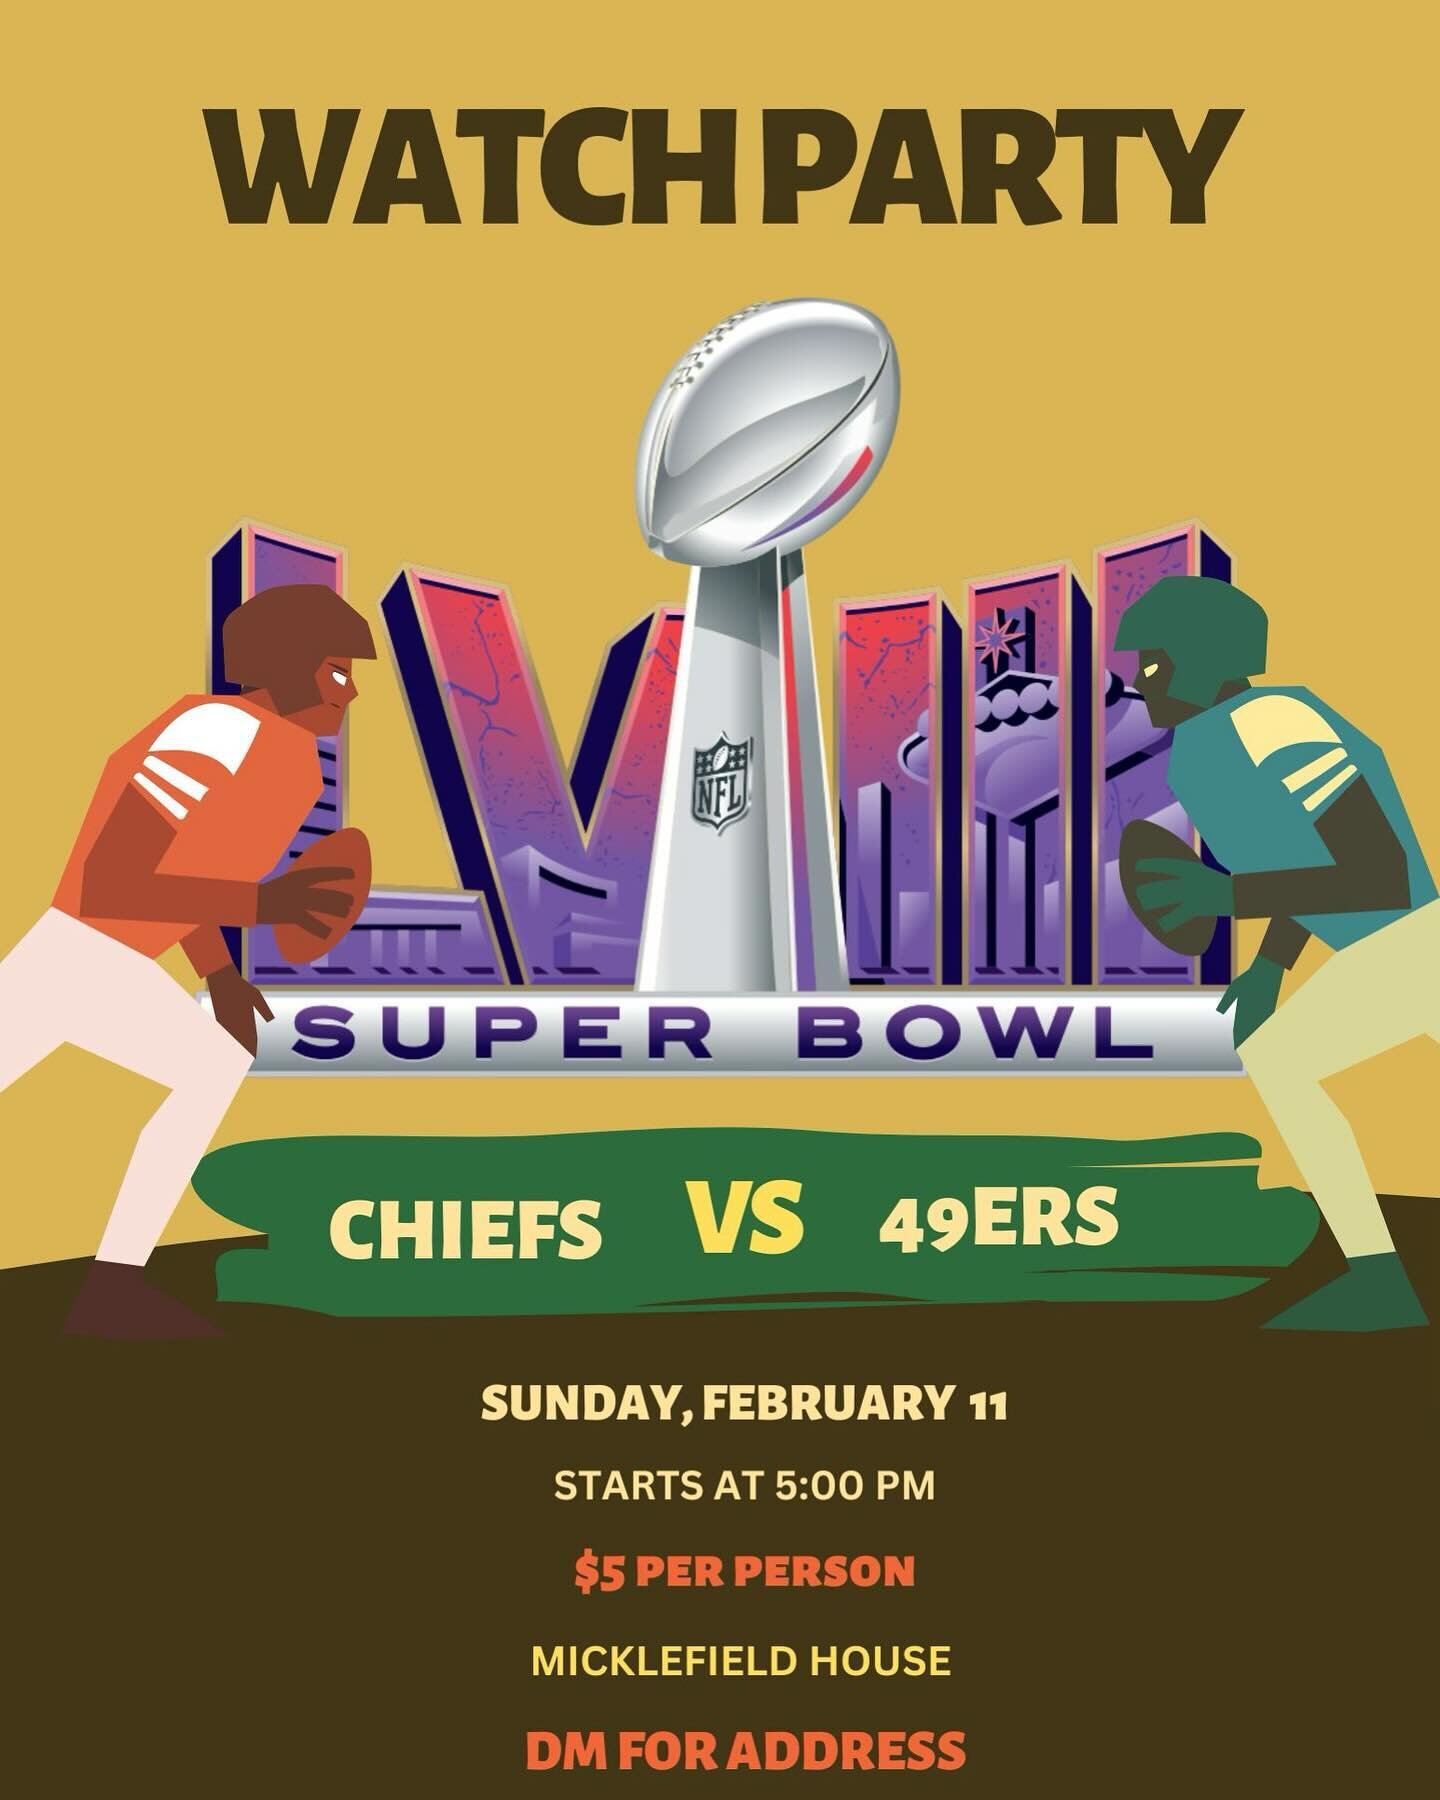 THIS Sunday&hellip;SUPER BOWL WATCH PARTY !! 🏈 

DM us for the address :)